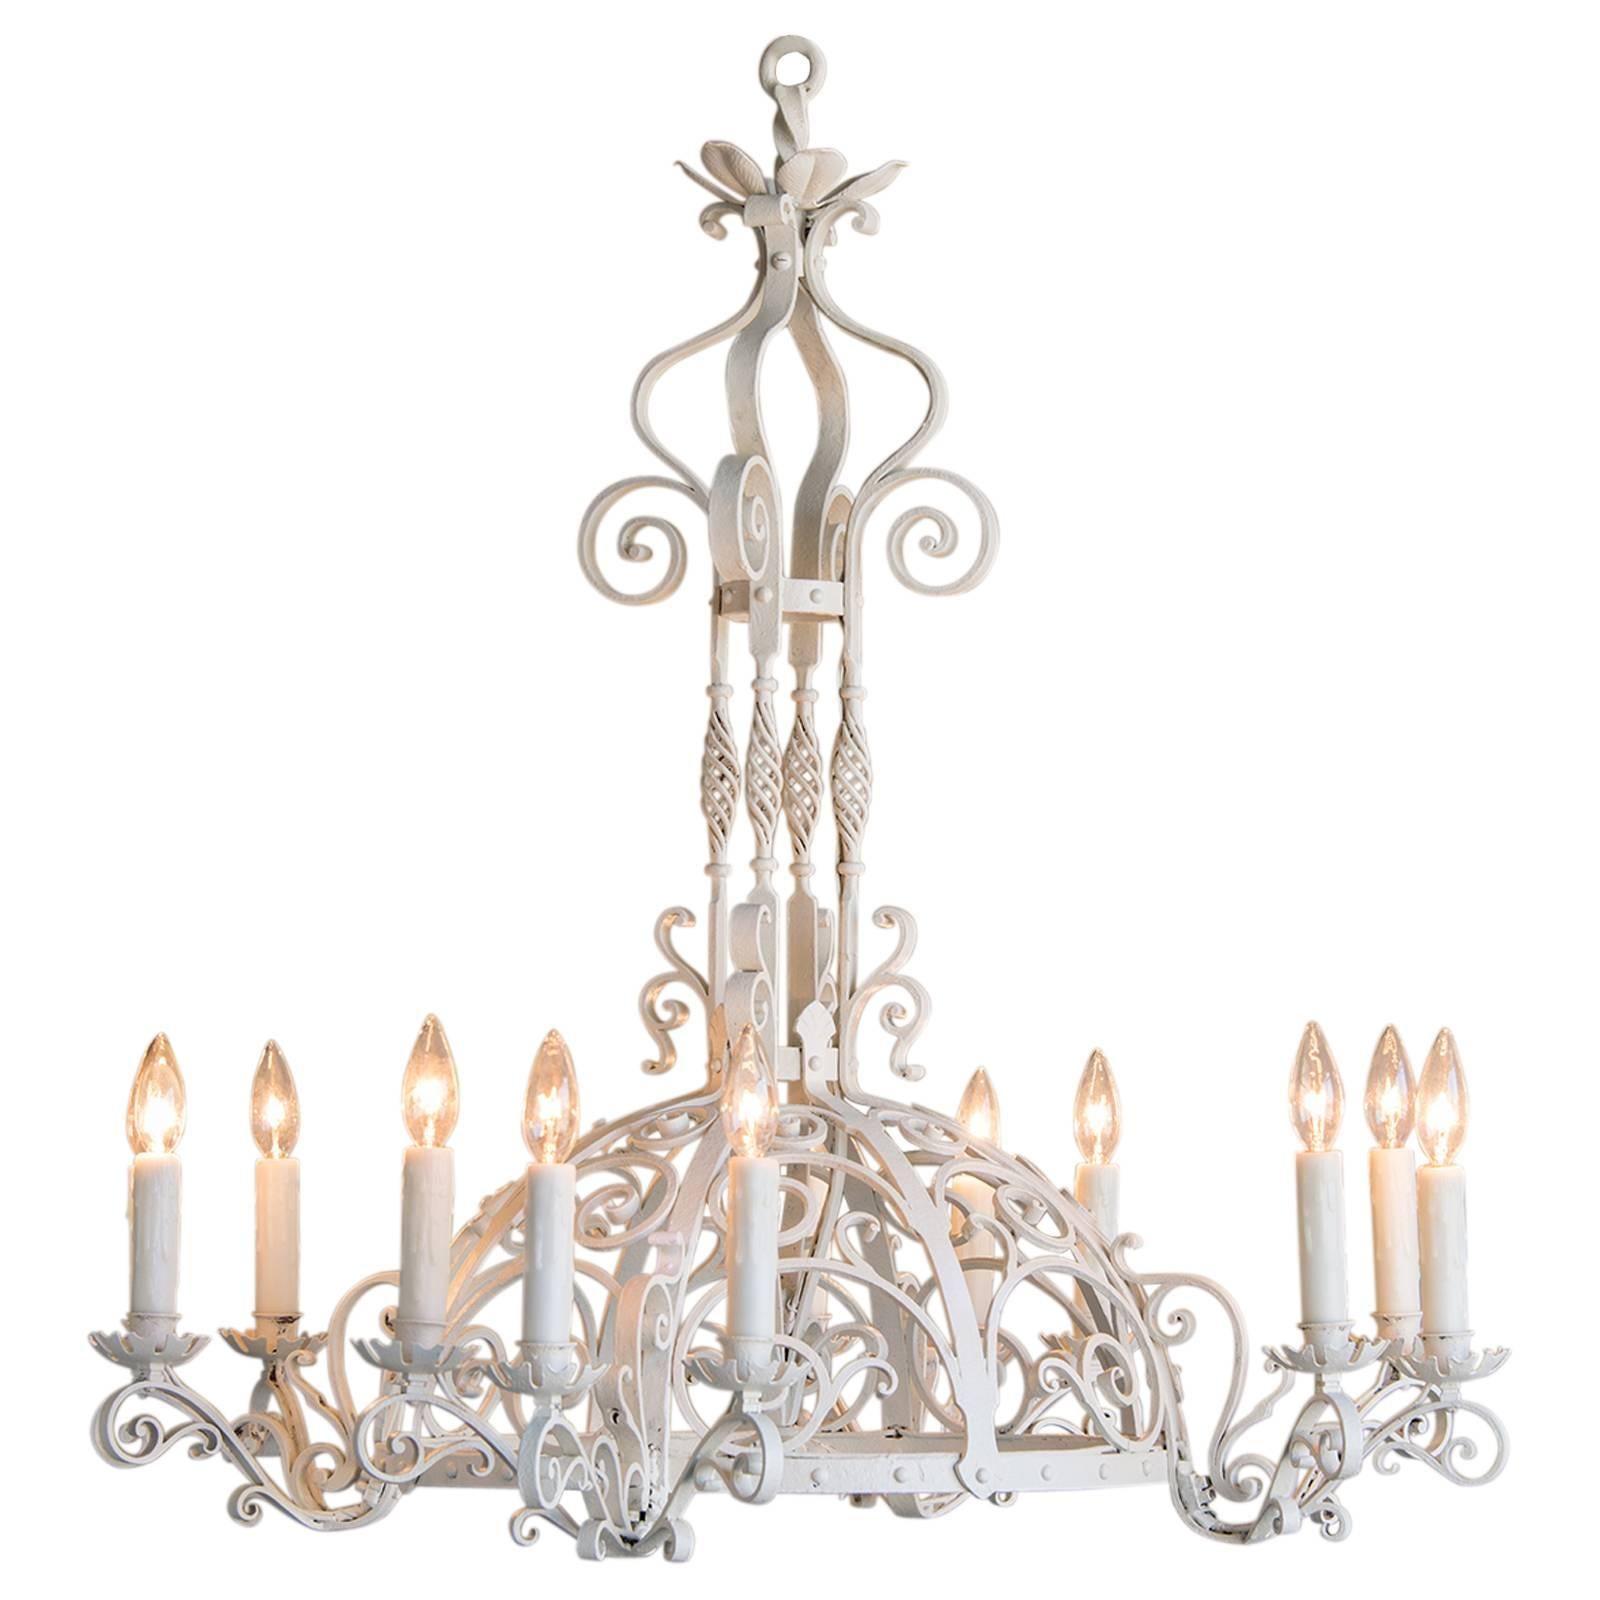 Antique French Forged Iron Painted Chandelier, Twelve Lights, circa 1910